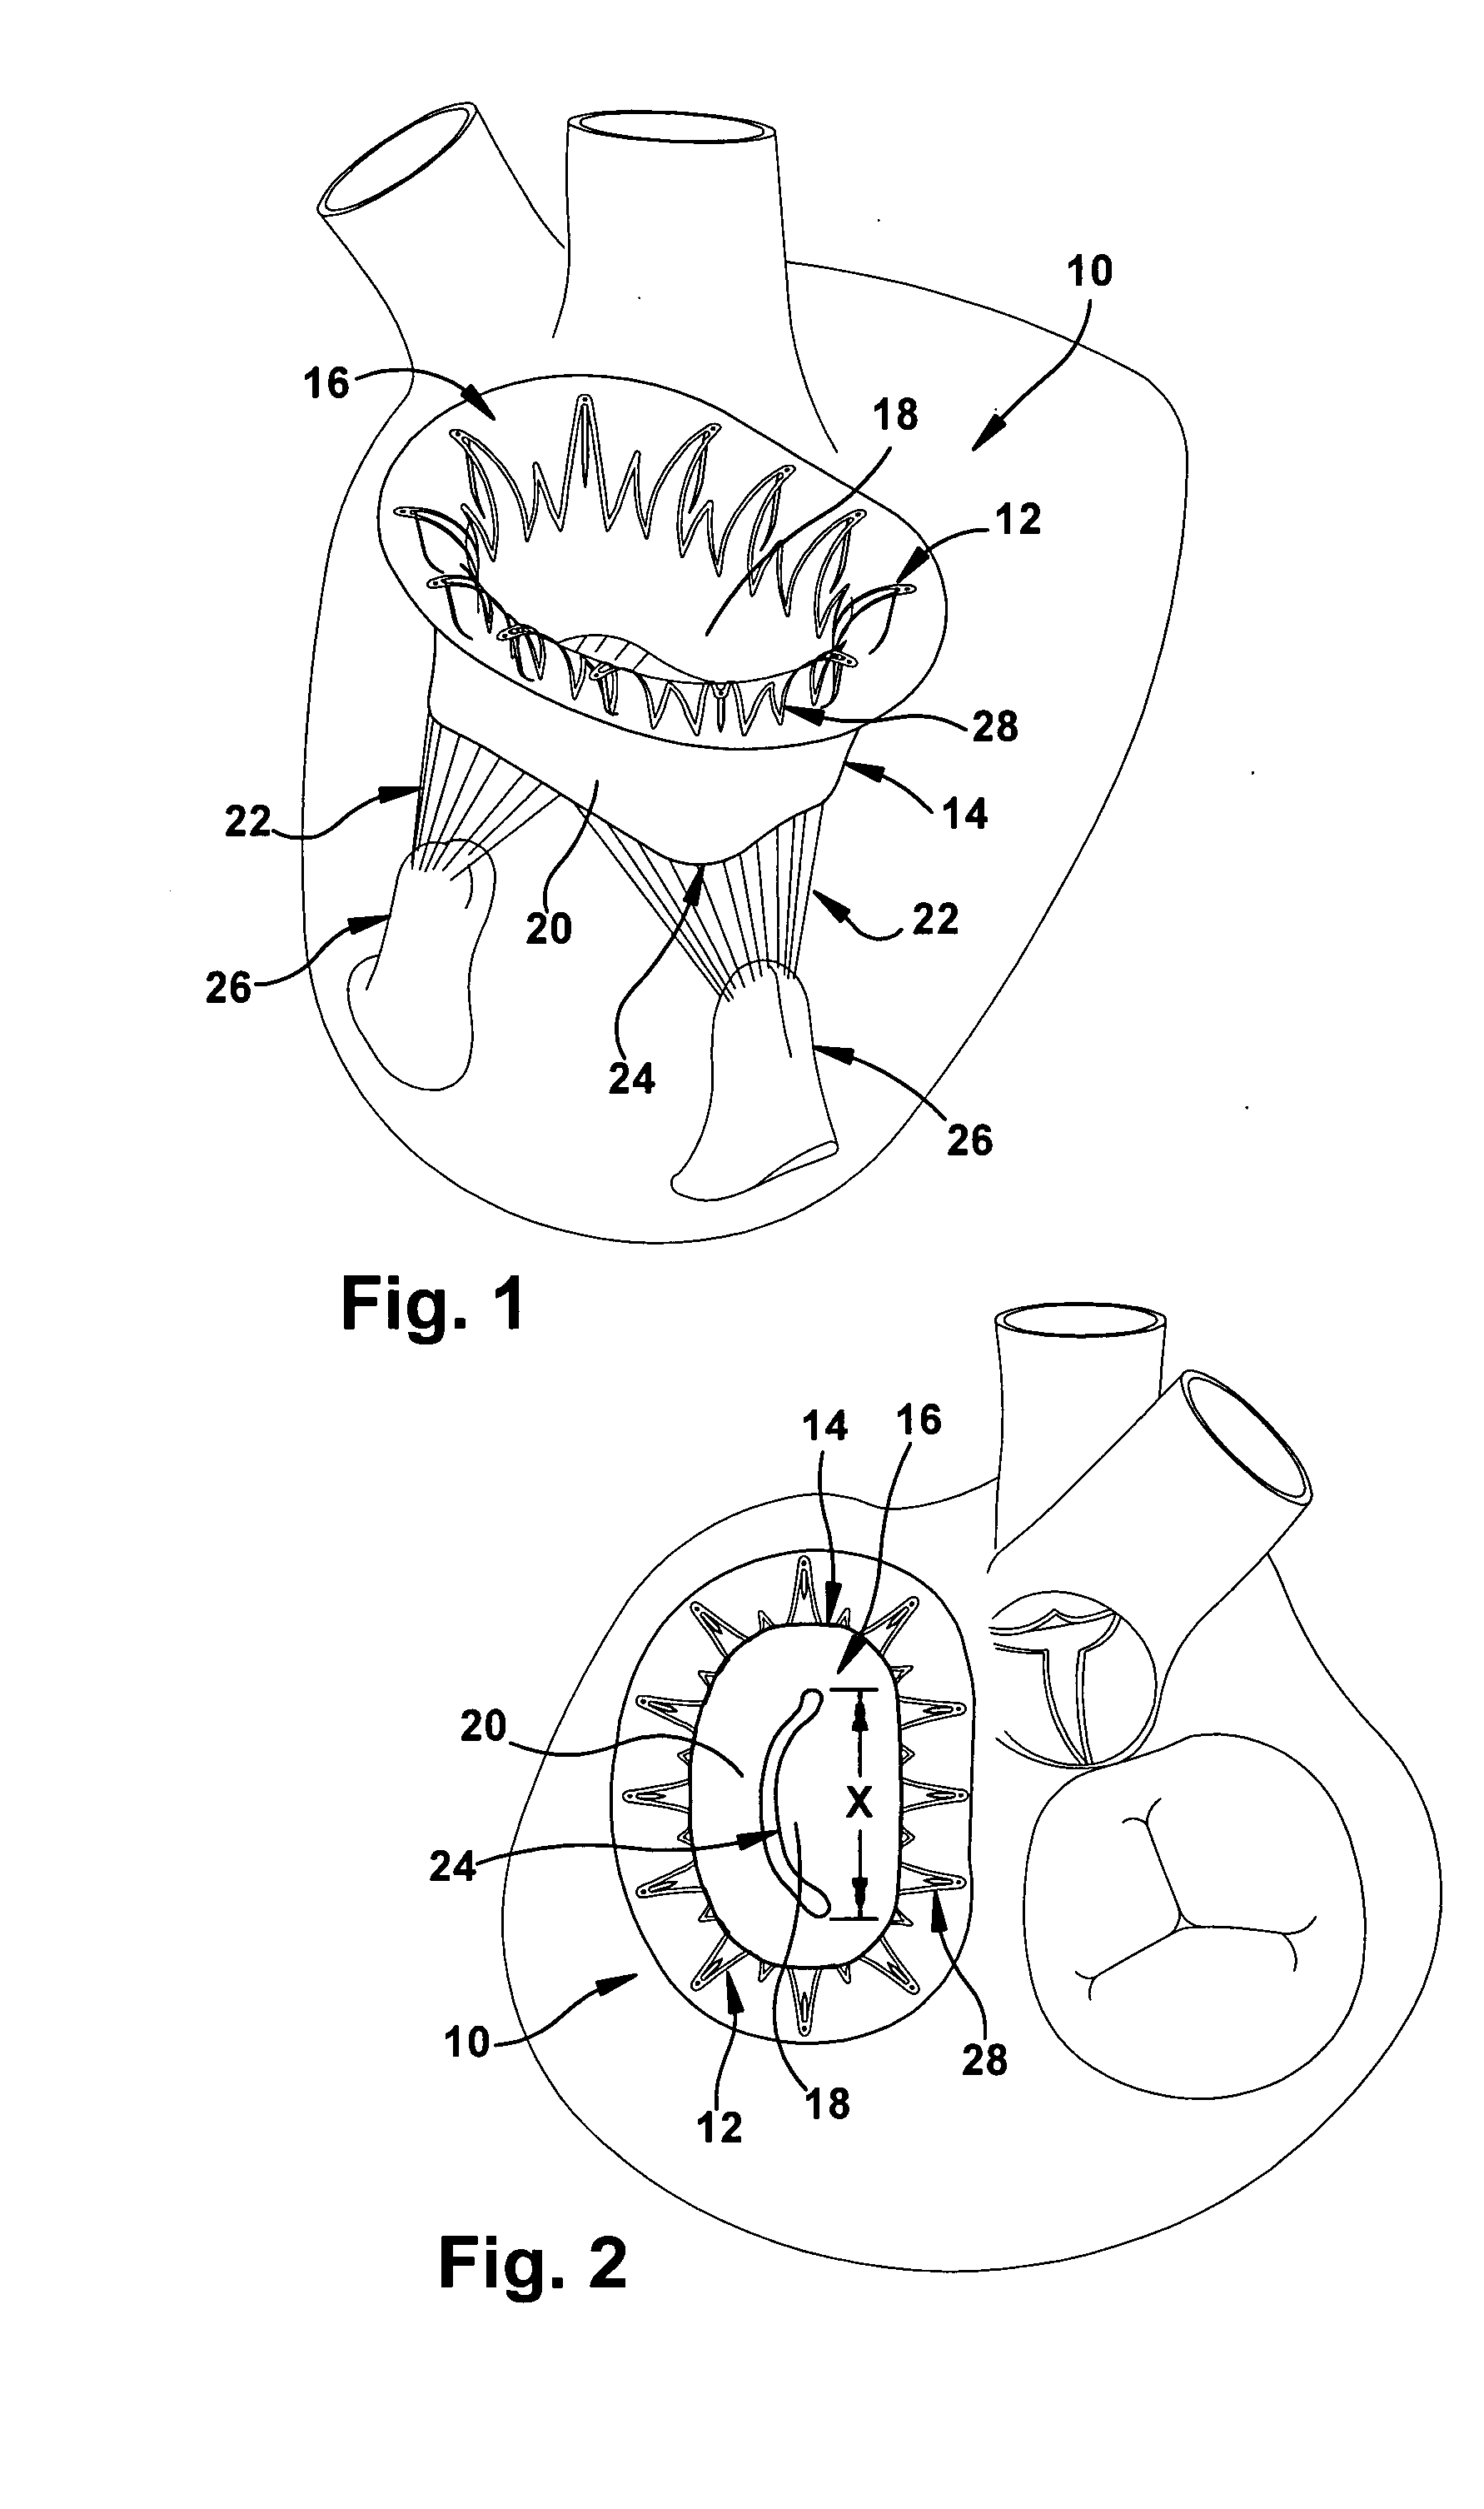 Apparatus and methods for repair of a cardiac valve